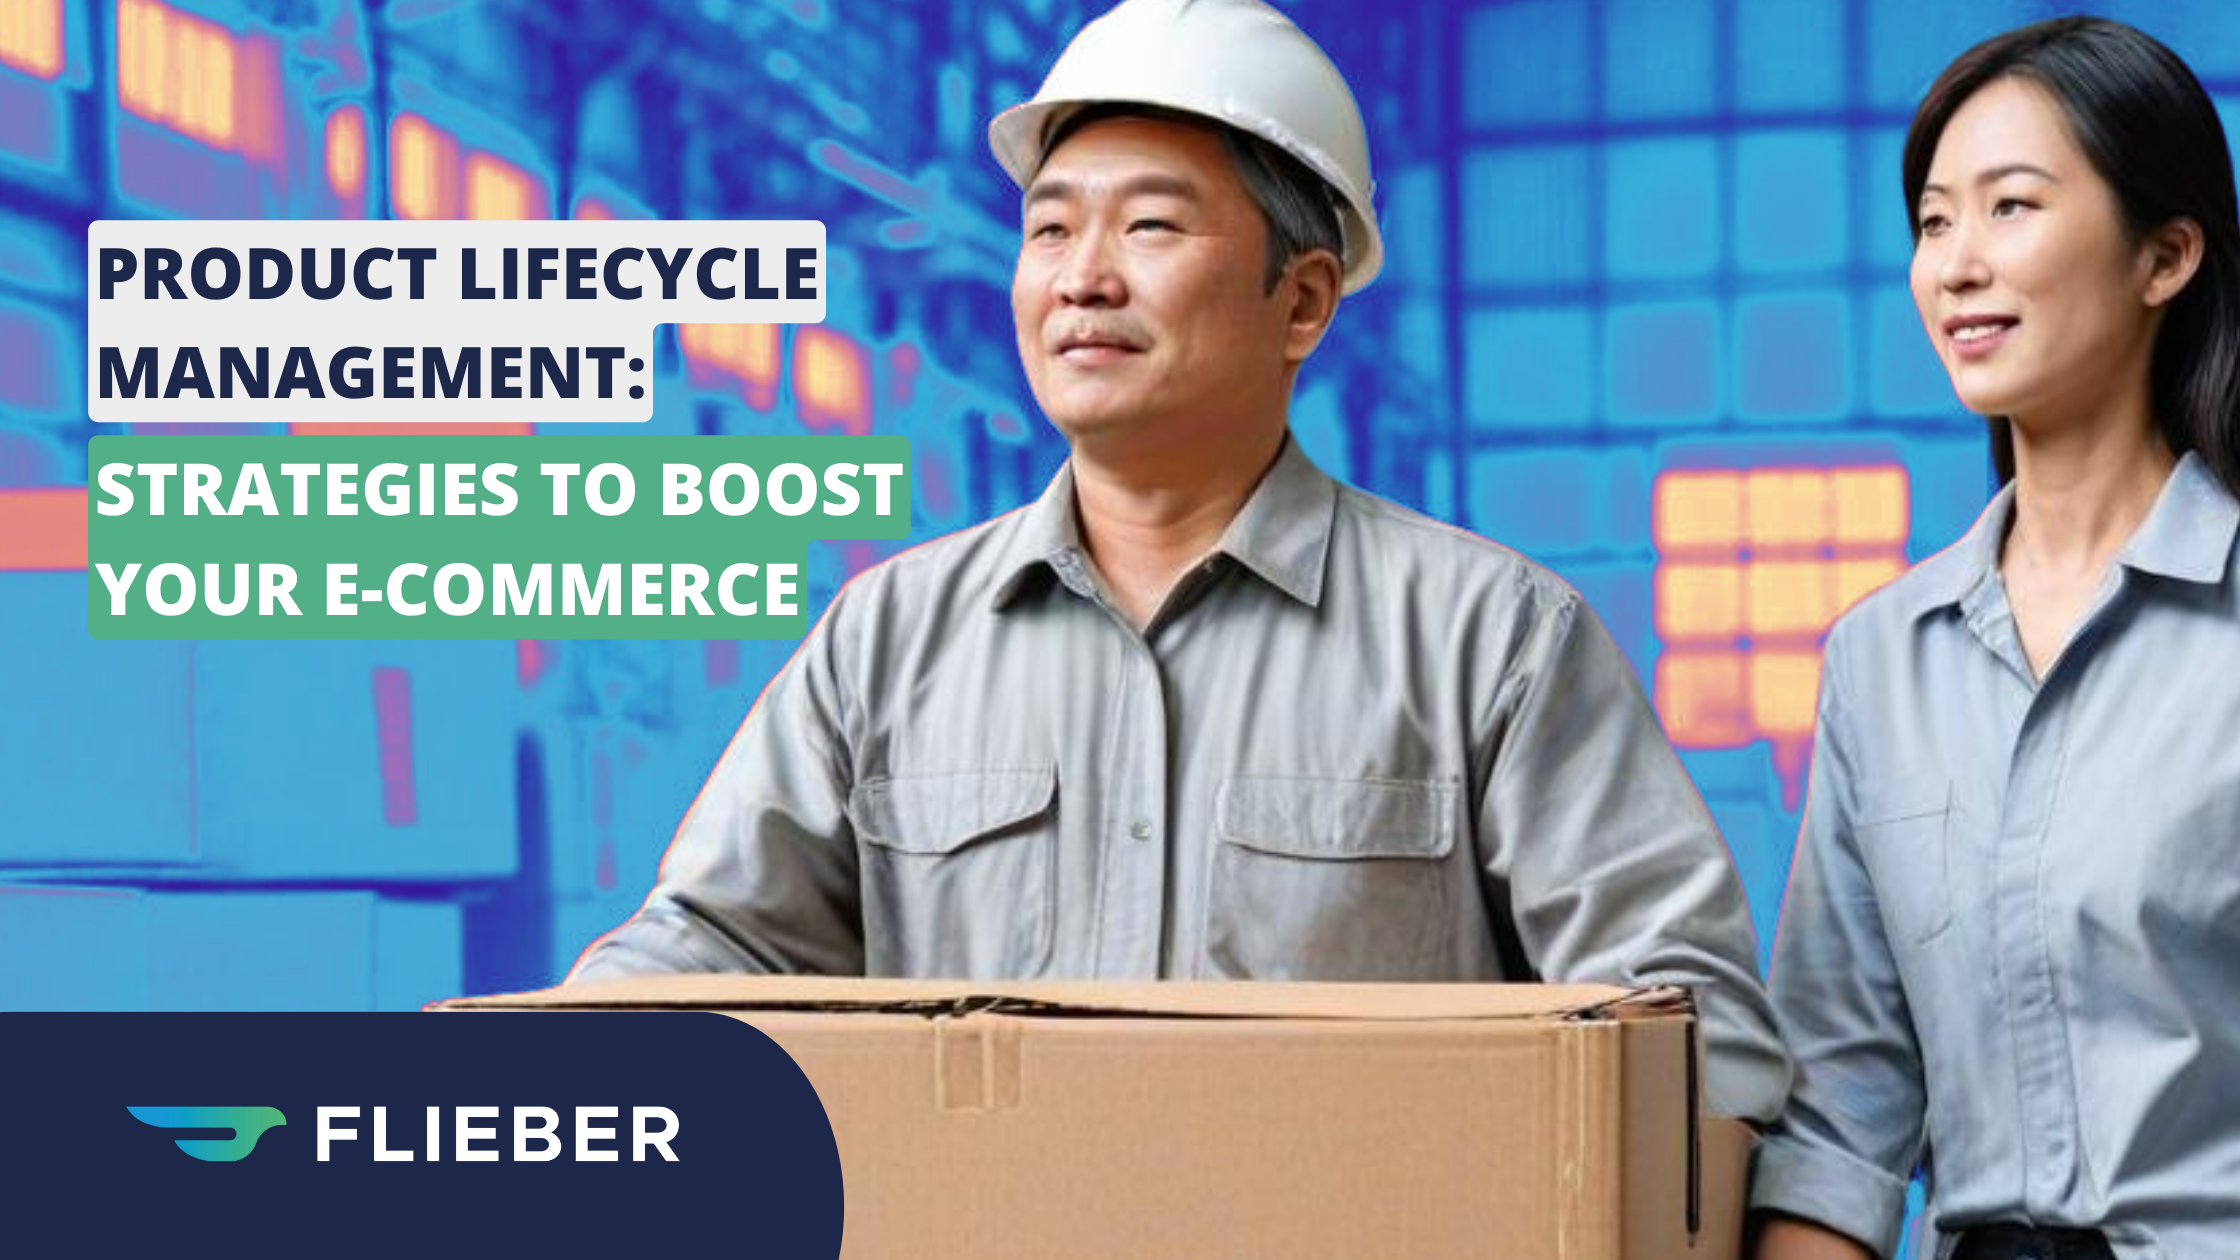 Product Lifecycle Management: 3 Strategies to Boost Your E-Commerce Sales and Profits